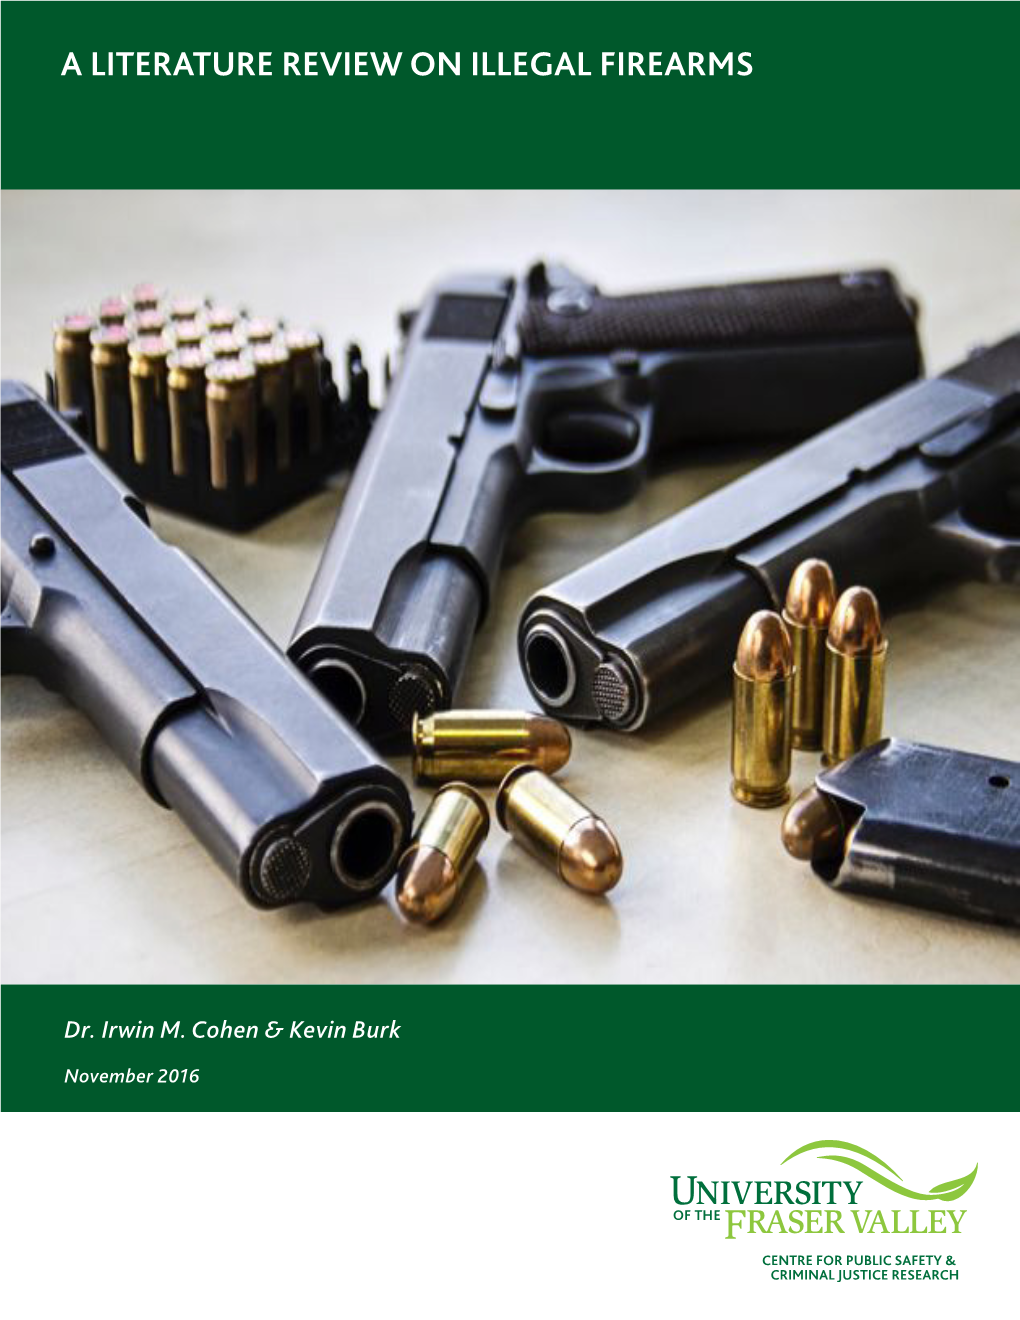 A Literature Review on Illegal Firearms